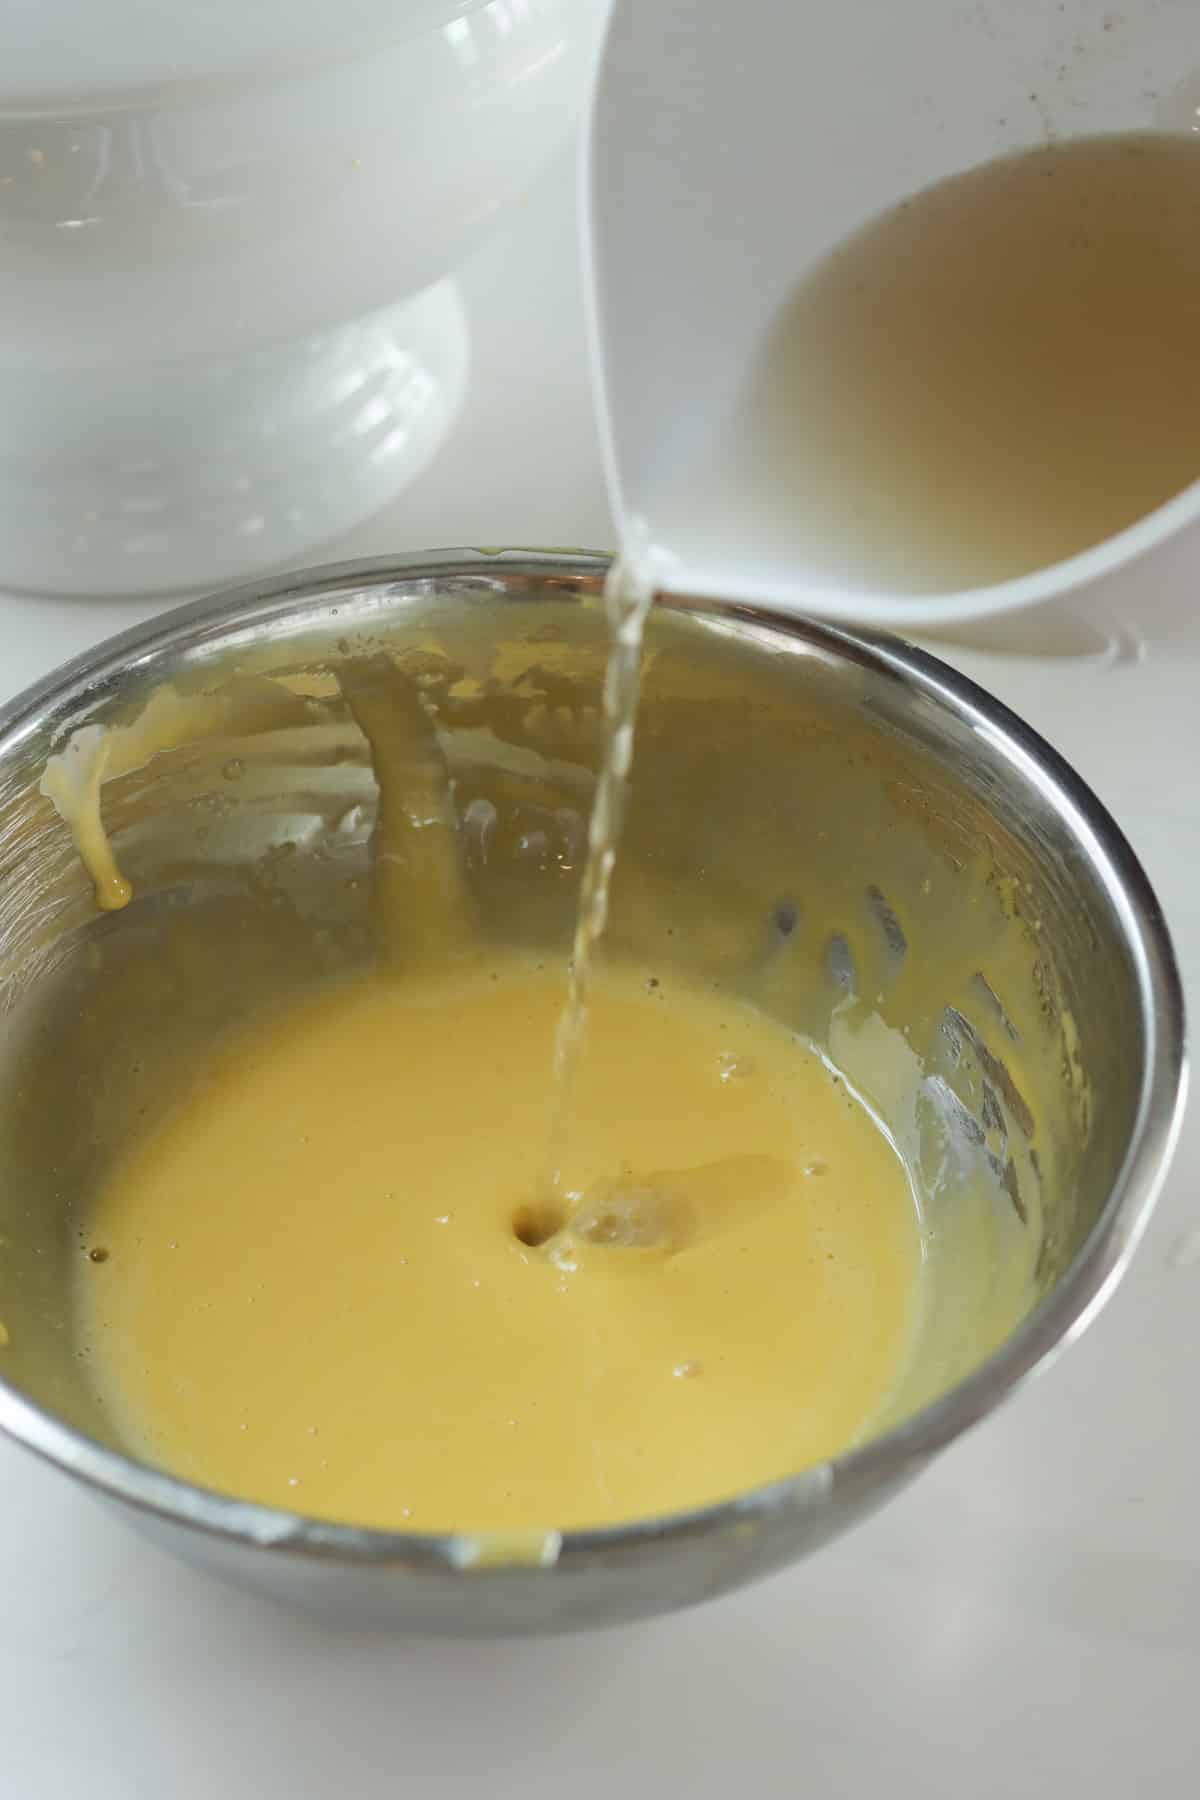 Slowly stir 1 cup of hot broth into the yolk emulsion